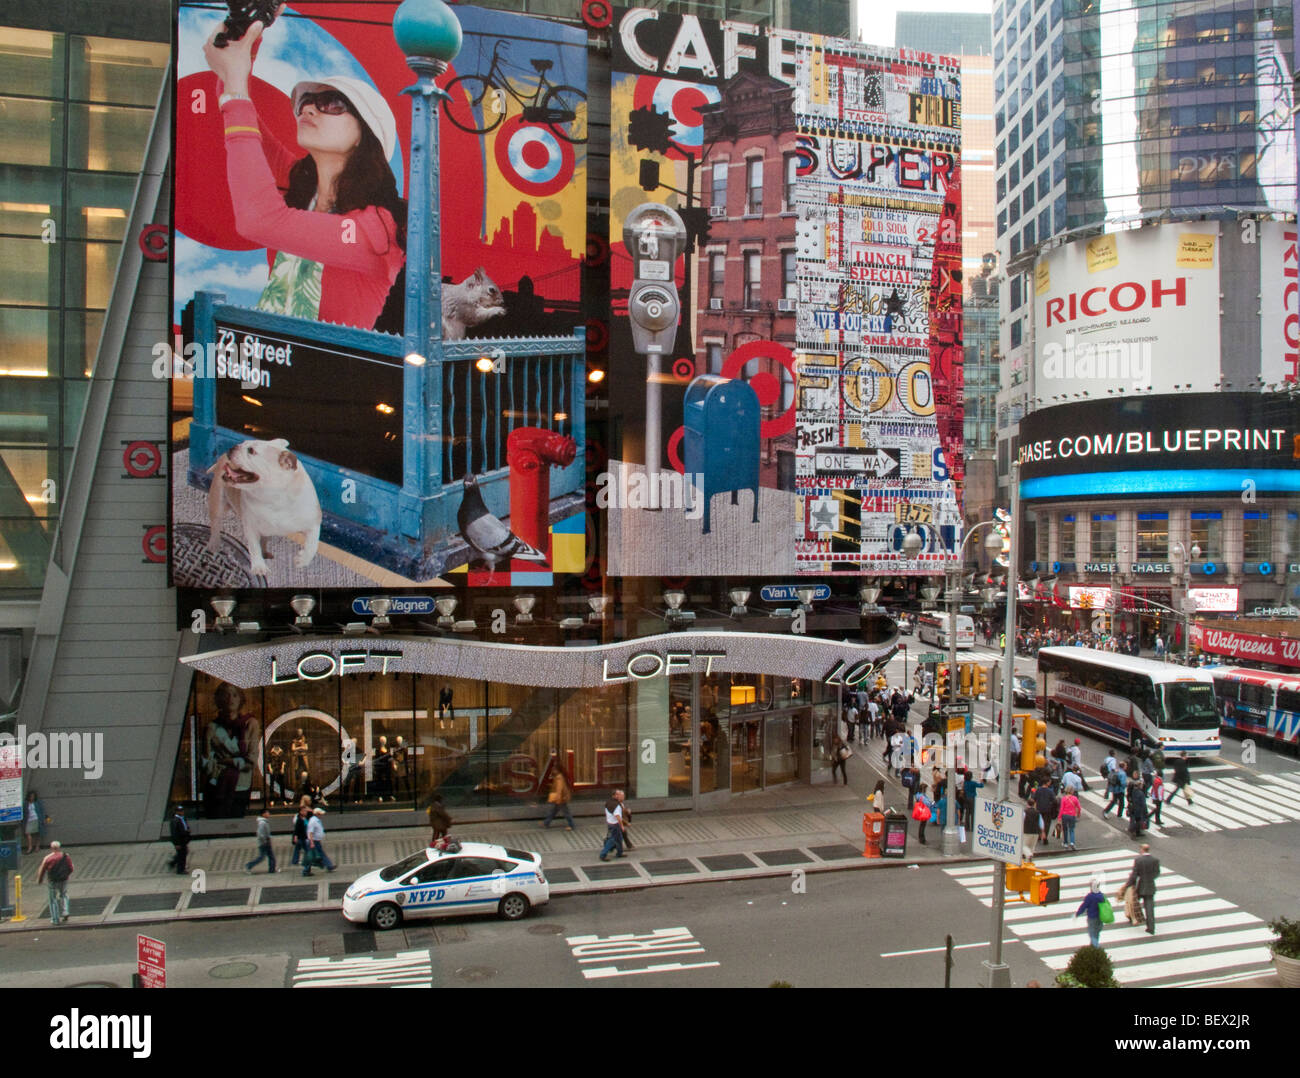 Target Billboard in Times Square New York City Stock Photo